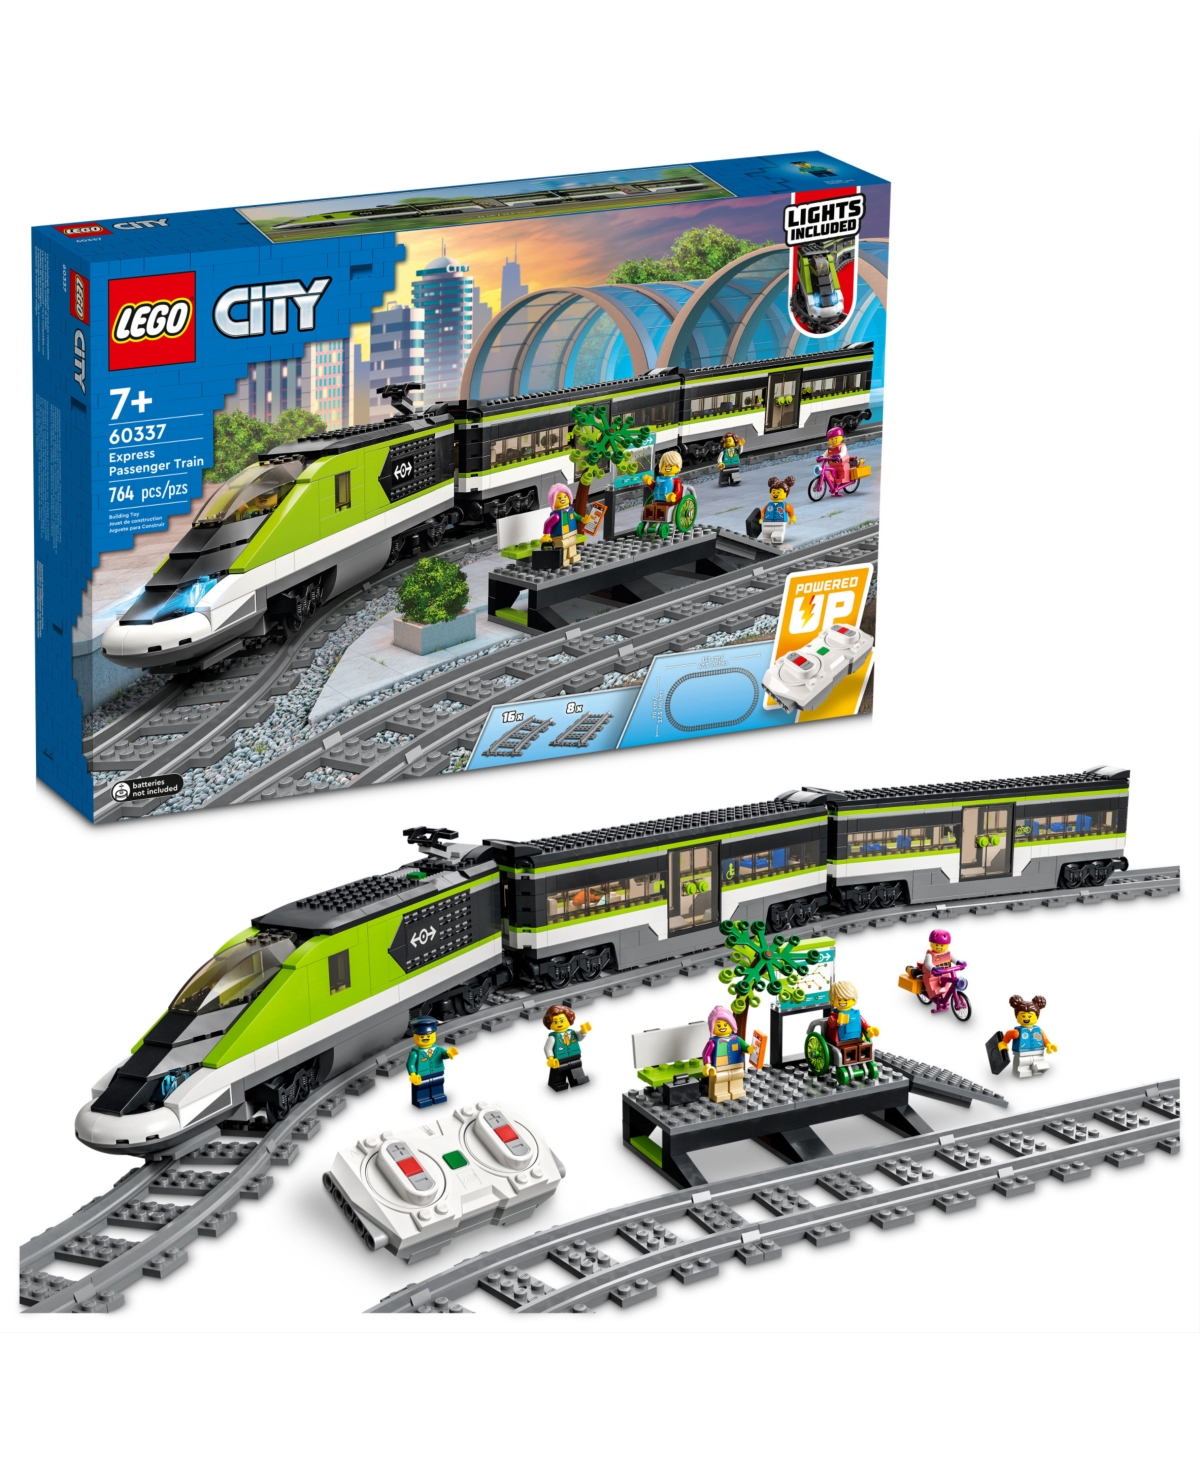 Lego City Express Passenger Train 60337 Toy Building Set With 6 Minifigures In No Color